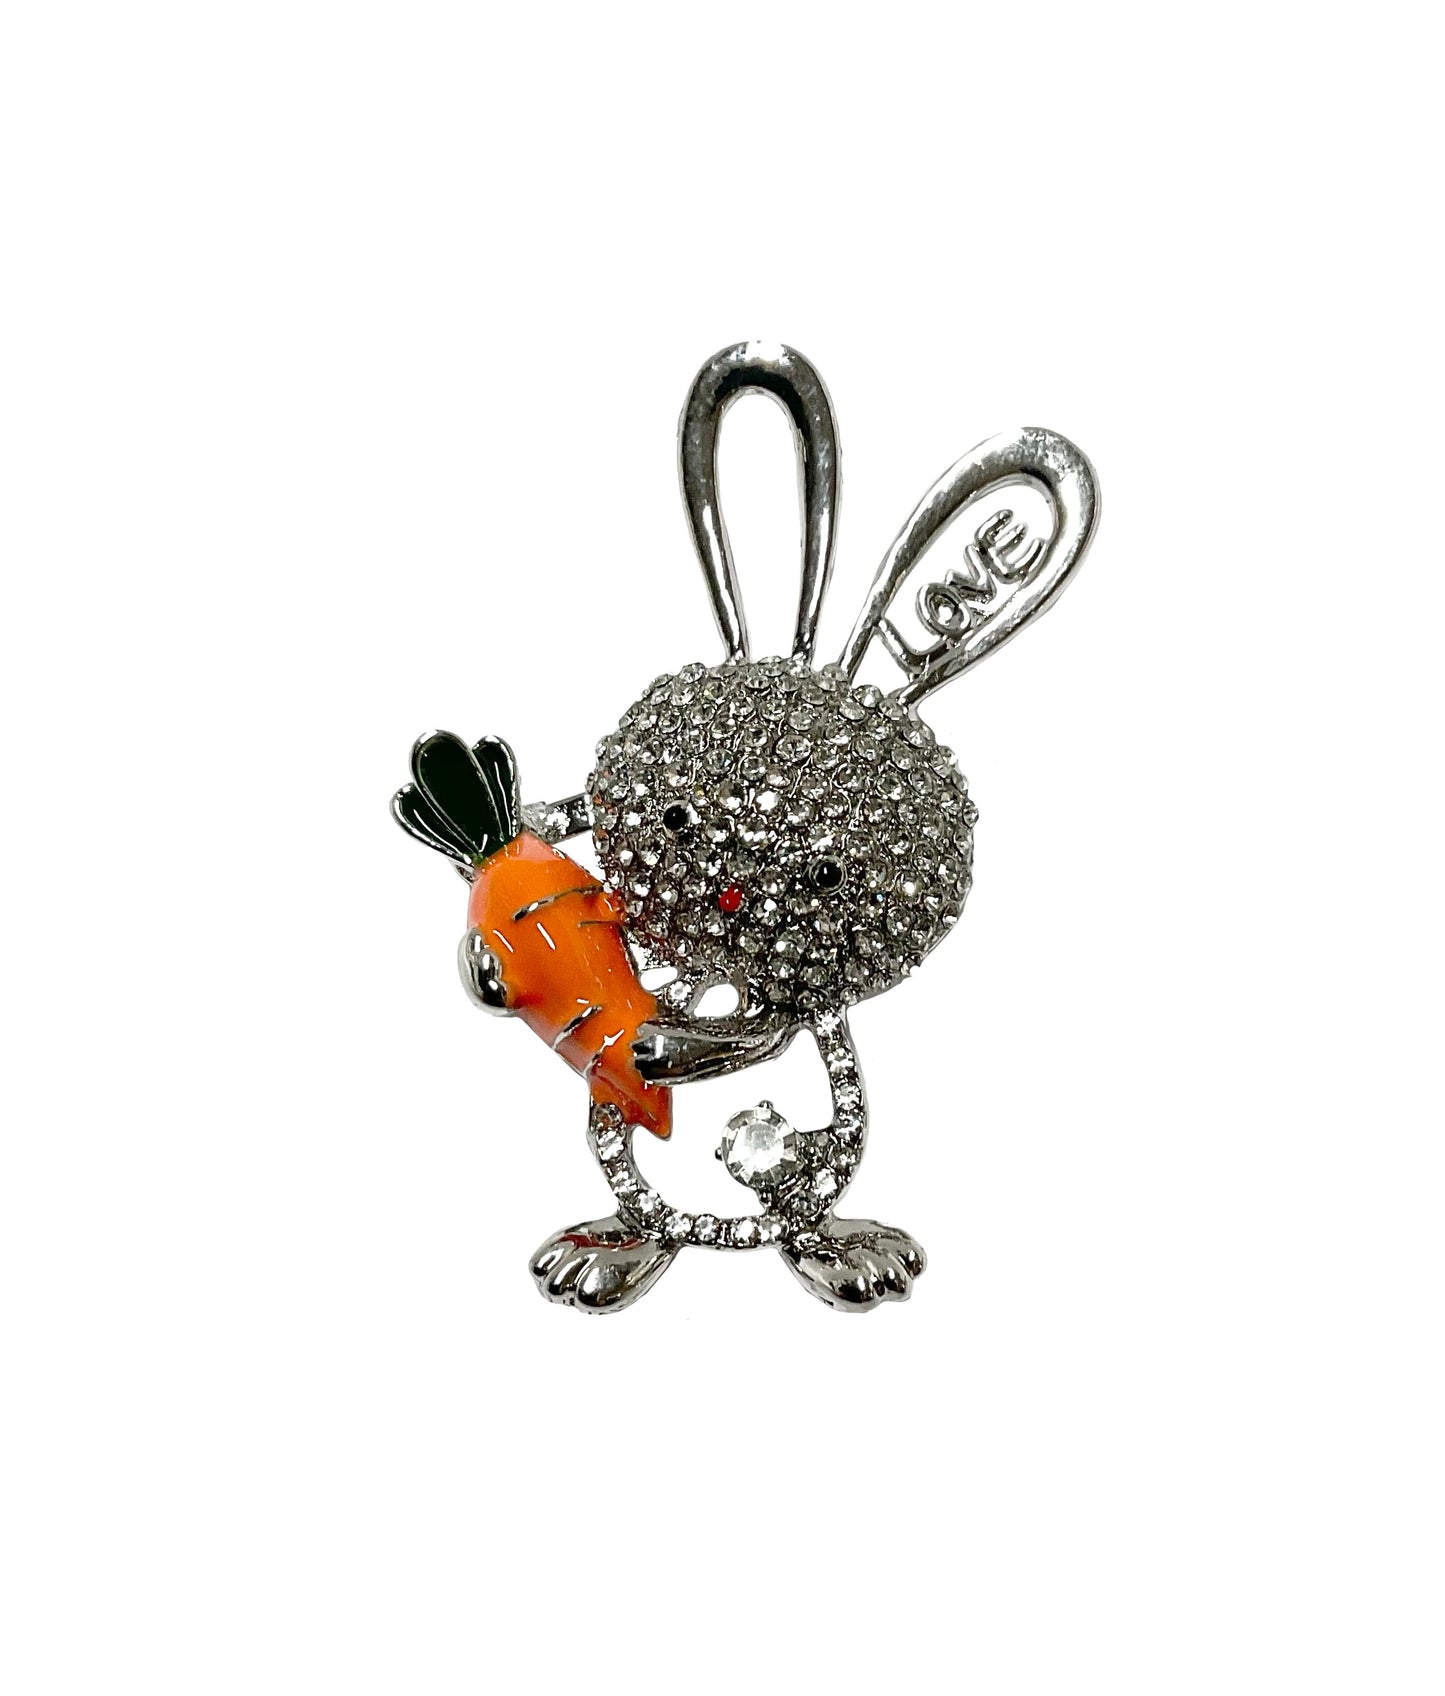 Bunny with Carrot Pin #89-91855